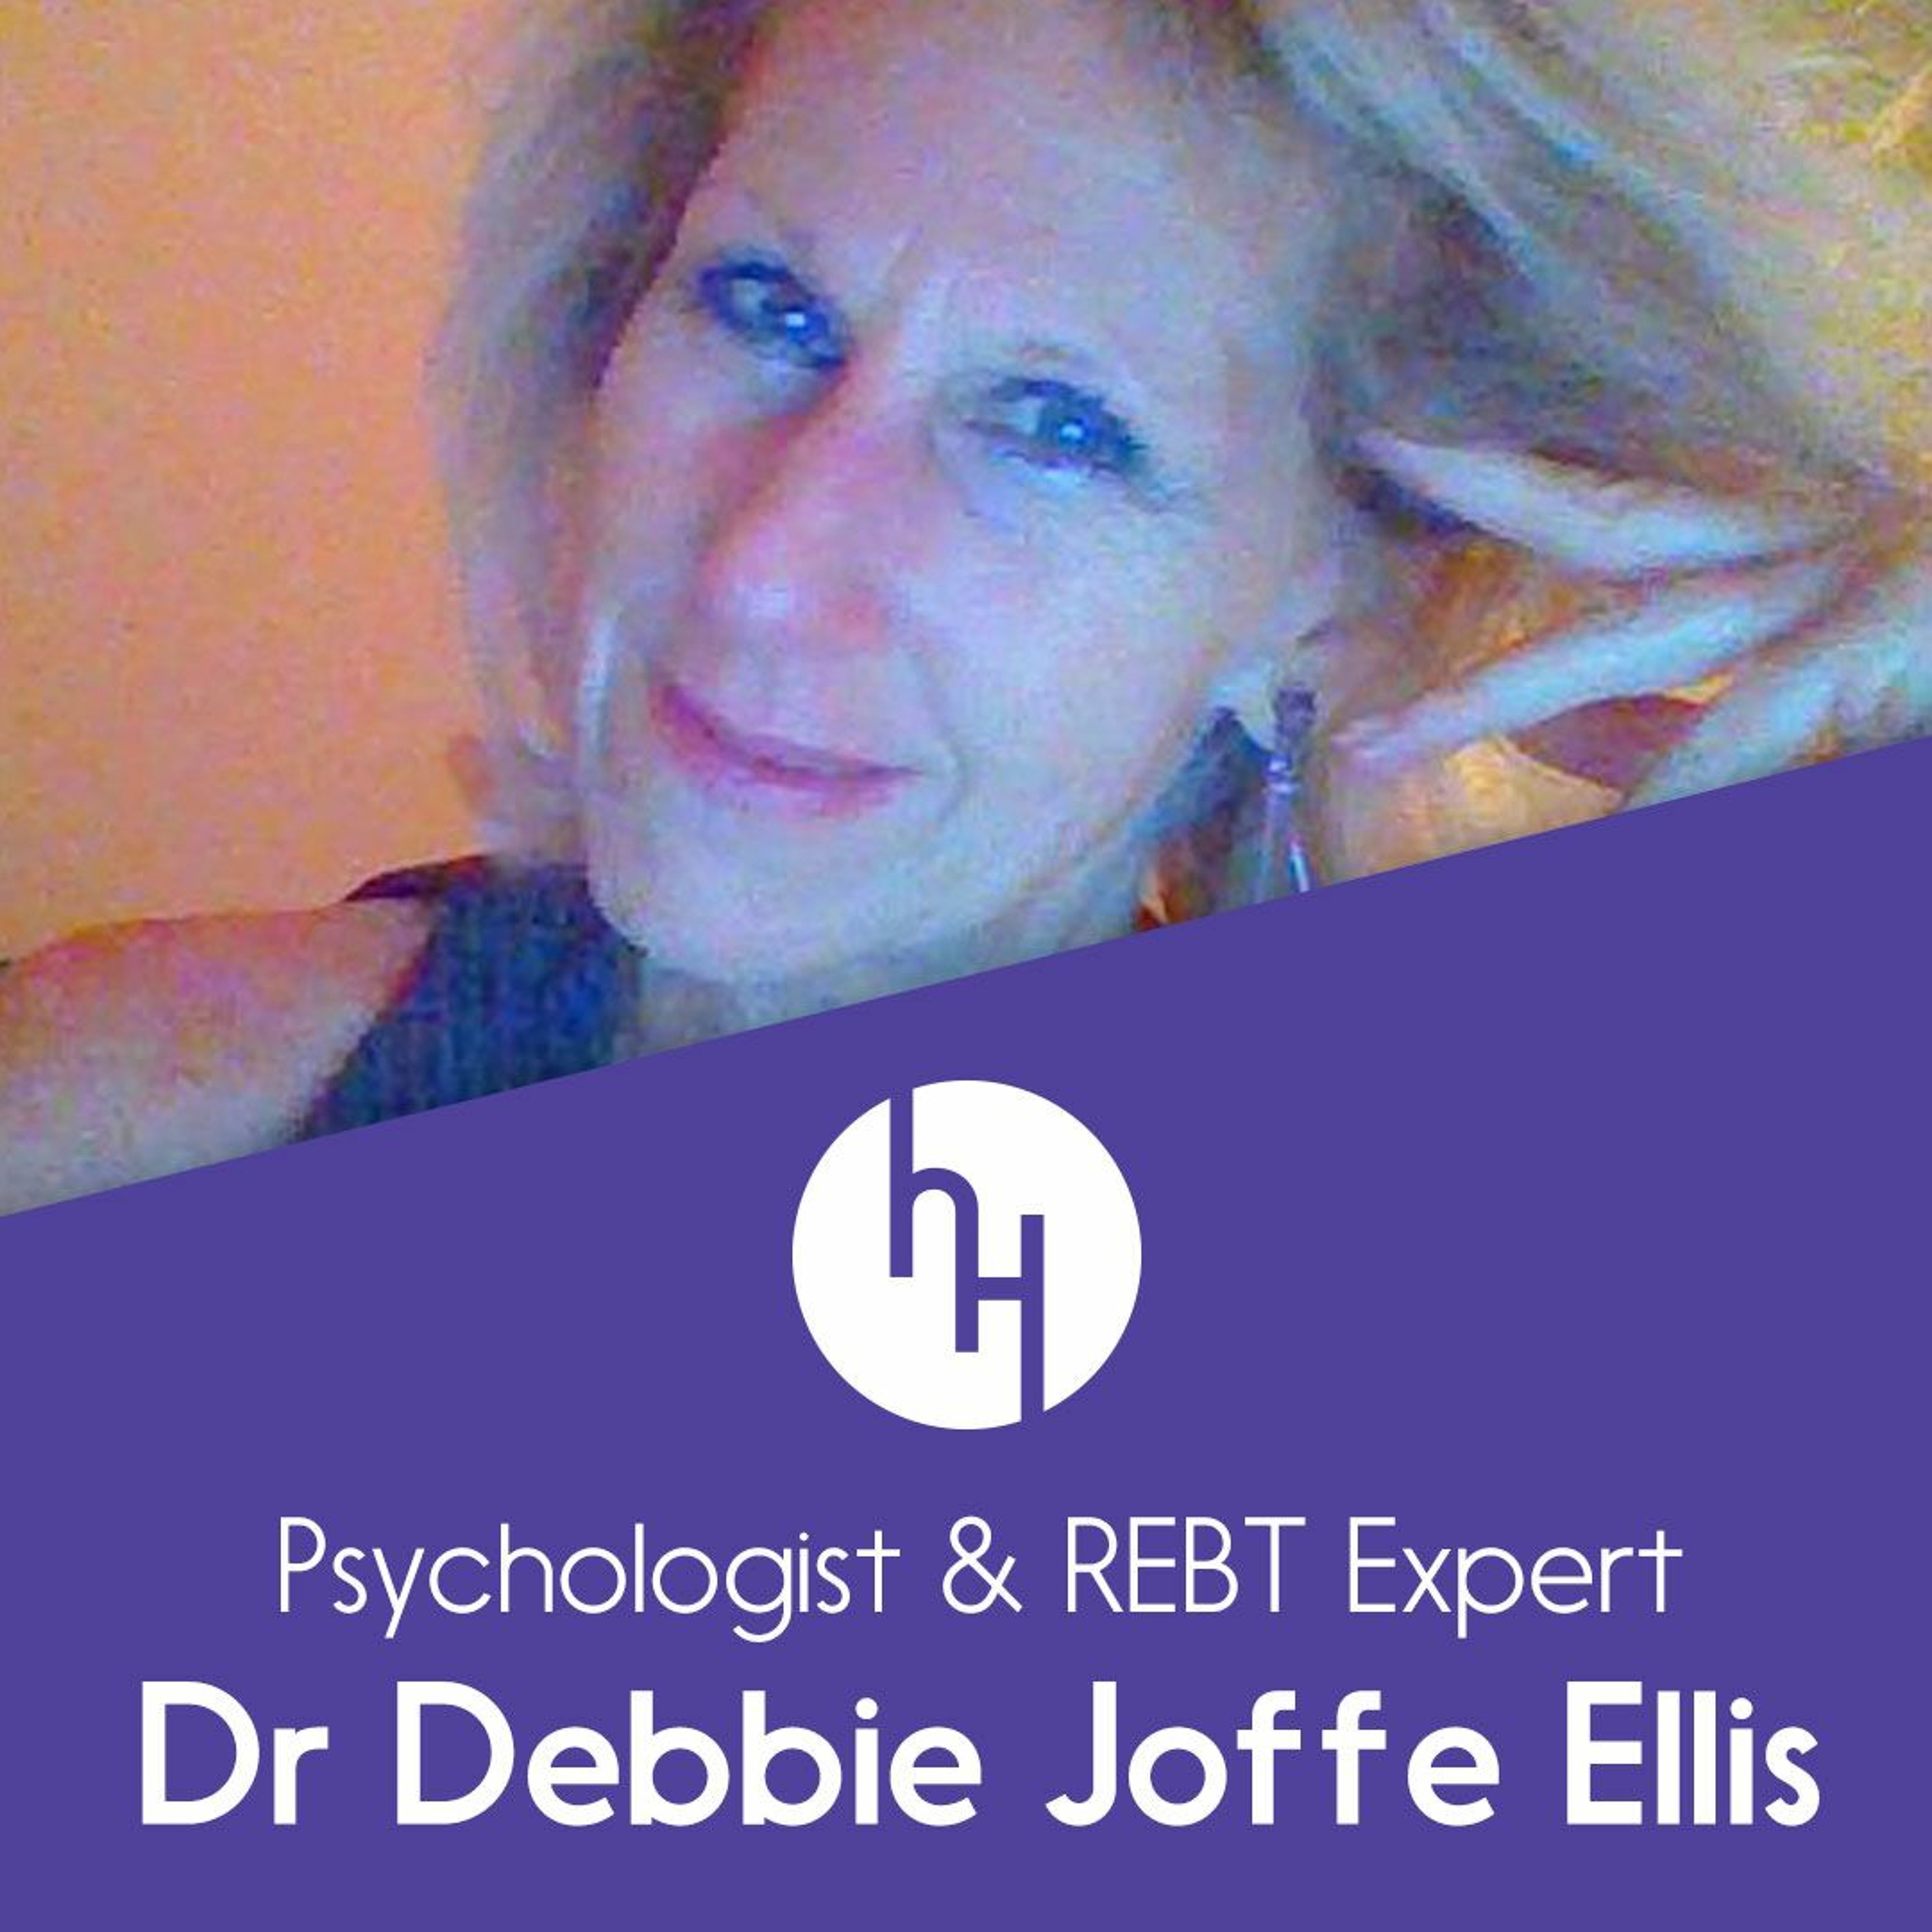 Ep 60: Applying REBT to anxiety, anger and childbirth (!) - with psychologist Dr Debbie Joffe Ellis